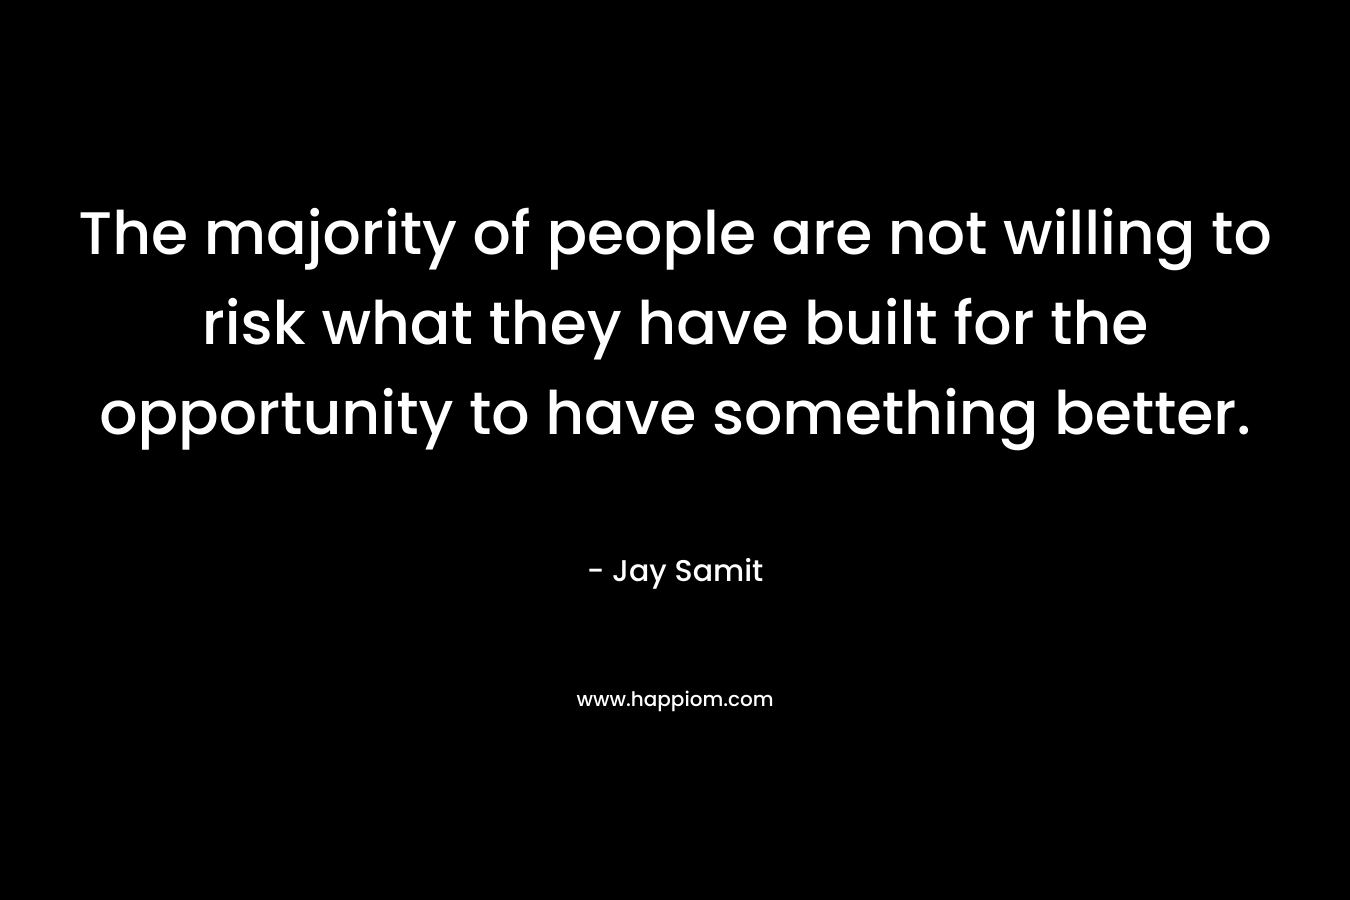 The majority of people are not willing to risk what they have built for the opportunity to have something better.